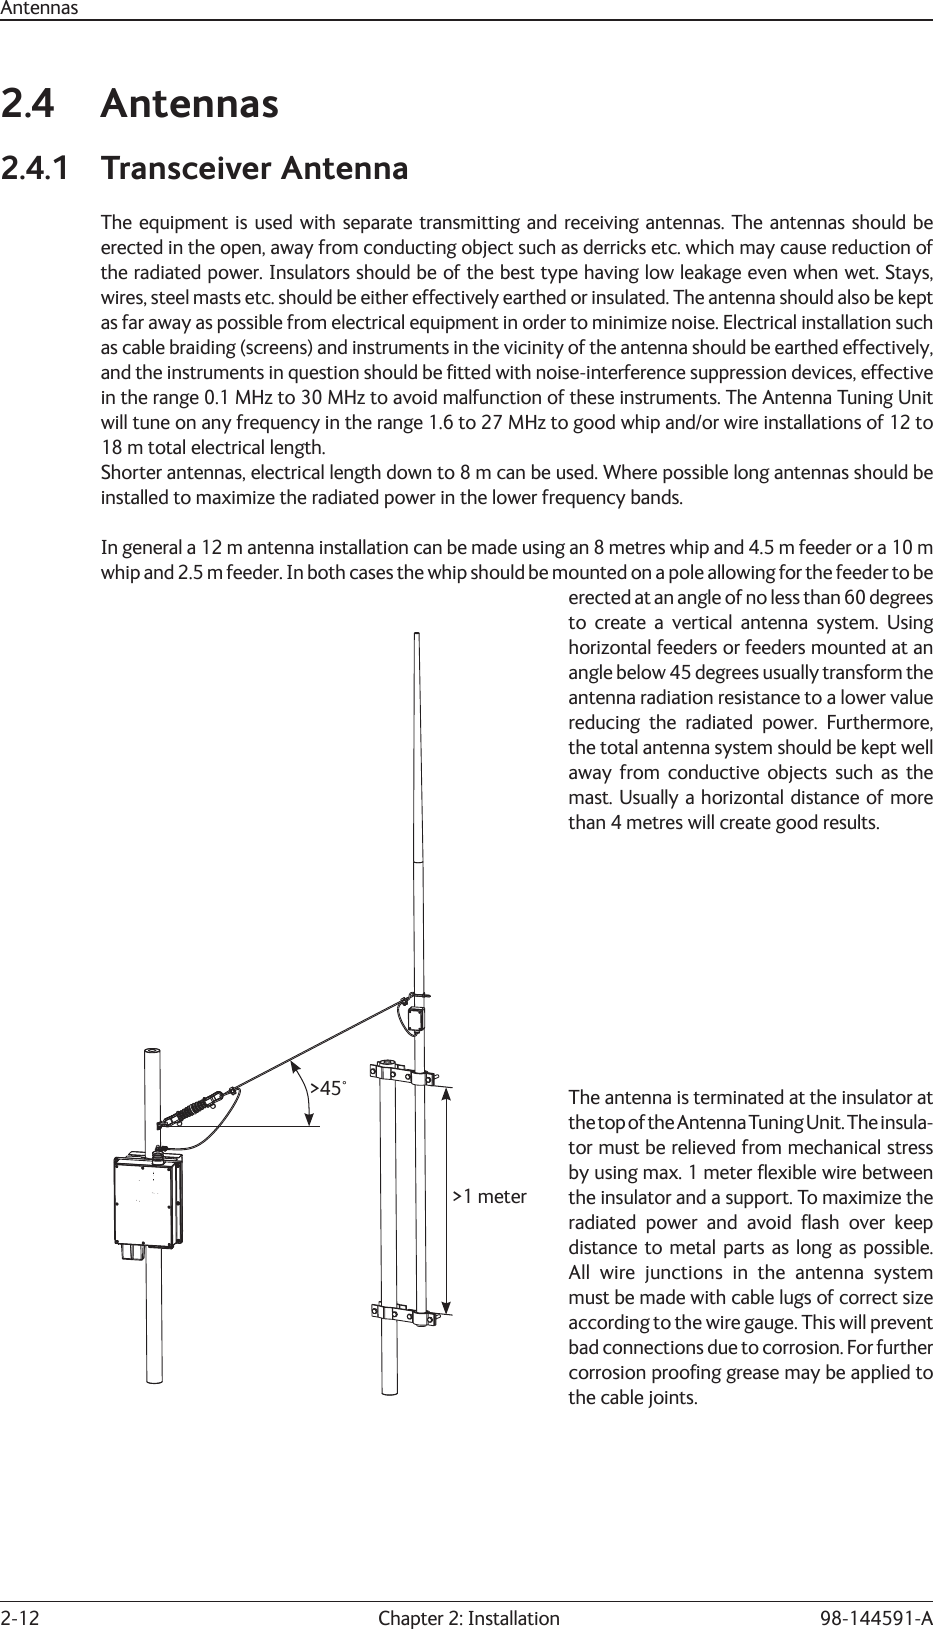 2-12  Chapter 2: Installation 98-144591-AAntennas2.4 Antennas2.4.1 Transceiver AntennaThe equipment is used with separate transmitting and receiving antennas. The antennas should be erected in the open, away from conducting object such as derricks etc. which may cause reduction of the radiated power. Insulators should be of the best type having low leakage even when wet. Stays, wires, steel masts etc. should be either effectively earthed or insulated. The antenna should also be kept as far away as possible from electrical equipment in order to minimize noise. Electrical installation such as cable braiding (screens) and instruments in the vicinity of the antenna should be earthed effectively, and the instruments in question should be ﬁ tted with noise-interference suppression devices, effective in the range 0.1 MHz to 30 MHz to avoid malfunction of these instruments. The Antenna Tuning Unit will tune on any frequency in the range 1.6 to 27 MHz to good whip and/or wire installations of 12 to 18 m total electrical length.Shorter antennas, electrical length down to 8 m can be used. Where possible long antennas should be installed to maximize the radiated power in the lower frequency bands.In general a 12 m antenna installation can be made using an 8 metres whip and 4.5 m feeder or a 10 m whip and 2.5 m feeder. In both cases the whip should be mounted on a pole allowing for the feeder to be erected at an angle of no less than 60 degrees to create a vertical antenna system. Using horizontal feeders or feeders mounted at an angle below 45 degrees usually transform the antenna radiation resistance to a lower value reducing the radiated power. Furthermore, the total antenna system should be kept well away from conductive objects such as the mast. Usually a horizontal distance of more than 4 metres will create good results.The antenna is terminated at the insulator at the top of the Antenna Tuning Unit. The insula-tor must be relieved from mechanical stress by using max. 1 meter ﬂ exible wire between the insulator and a support. To maximize the radiated power and avoid ﬂ ash over keep distance to metal parts as long as possible. All wire junctions in the antenna system must be made with cable lugs of correct size according to the wire gauge. This will prevent bad connections due to corrosion. For further corrosion prooﬁ ng grease may be applied to the cable joints.&gt;45°&gt;1 meter